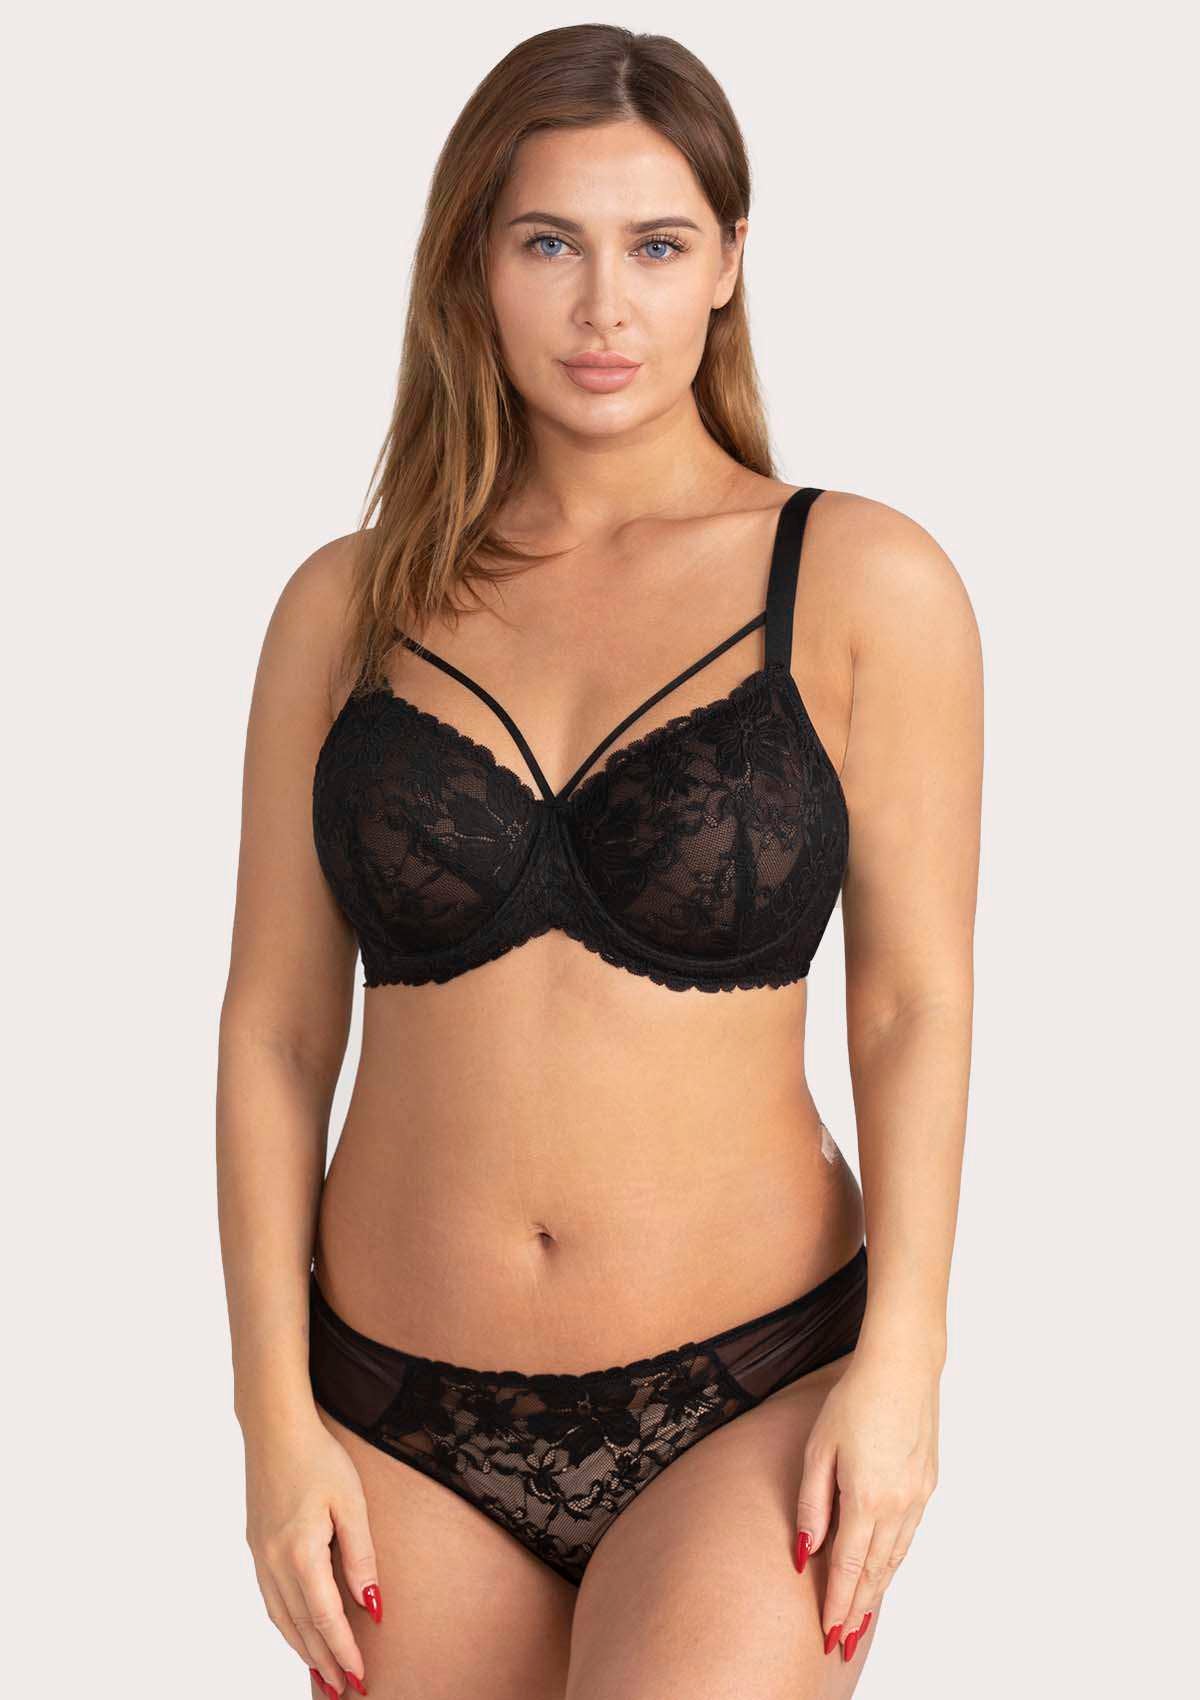 HSIA Pretty In Petals Lace Bra And Panty Set: Non Padded Wired Bra - Black / 38 / G